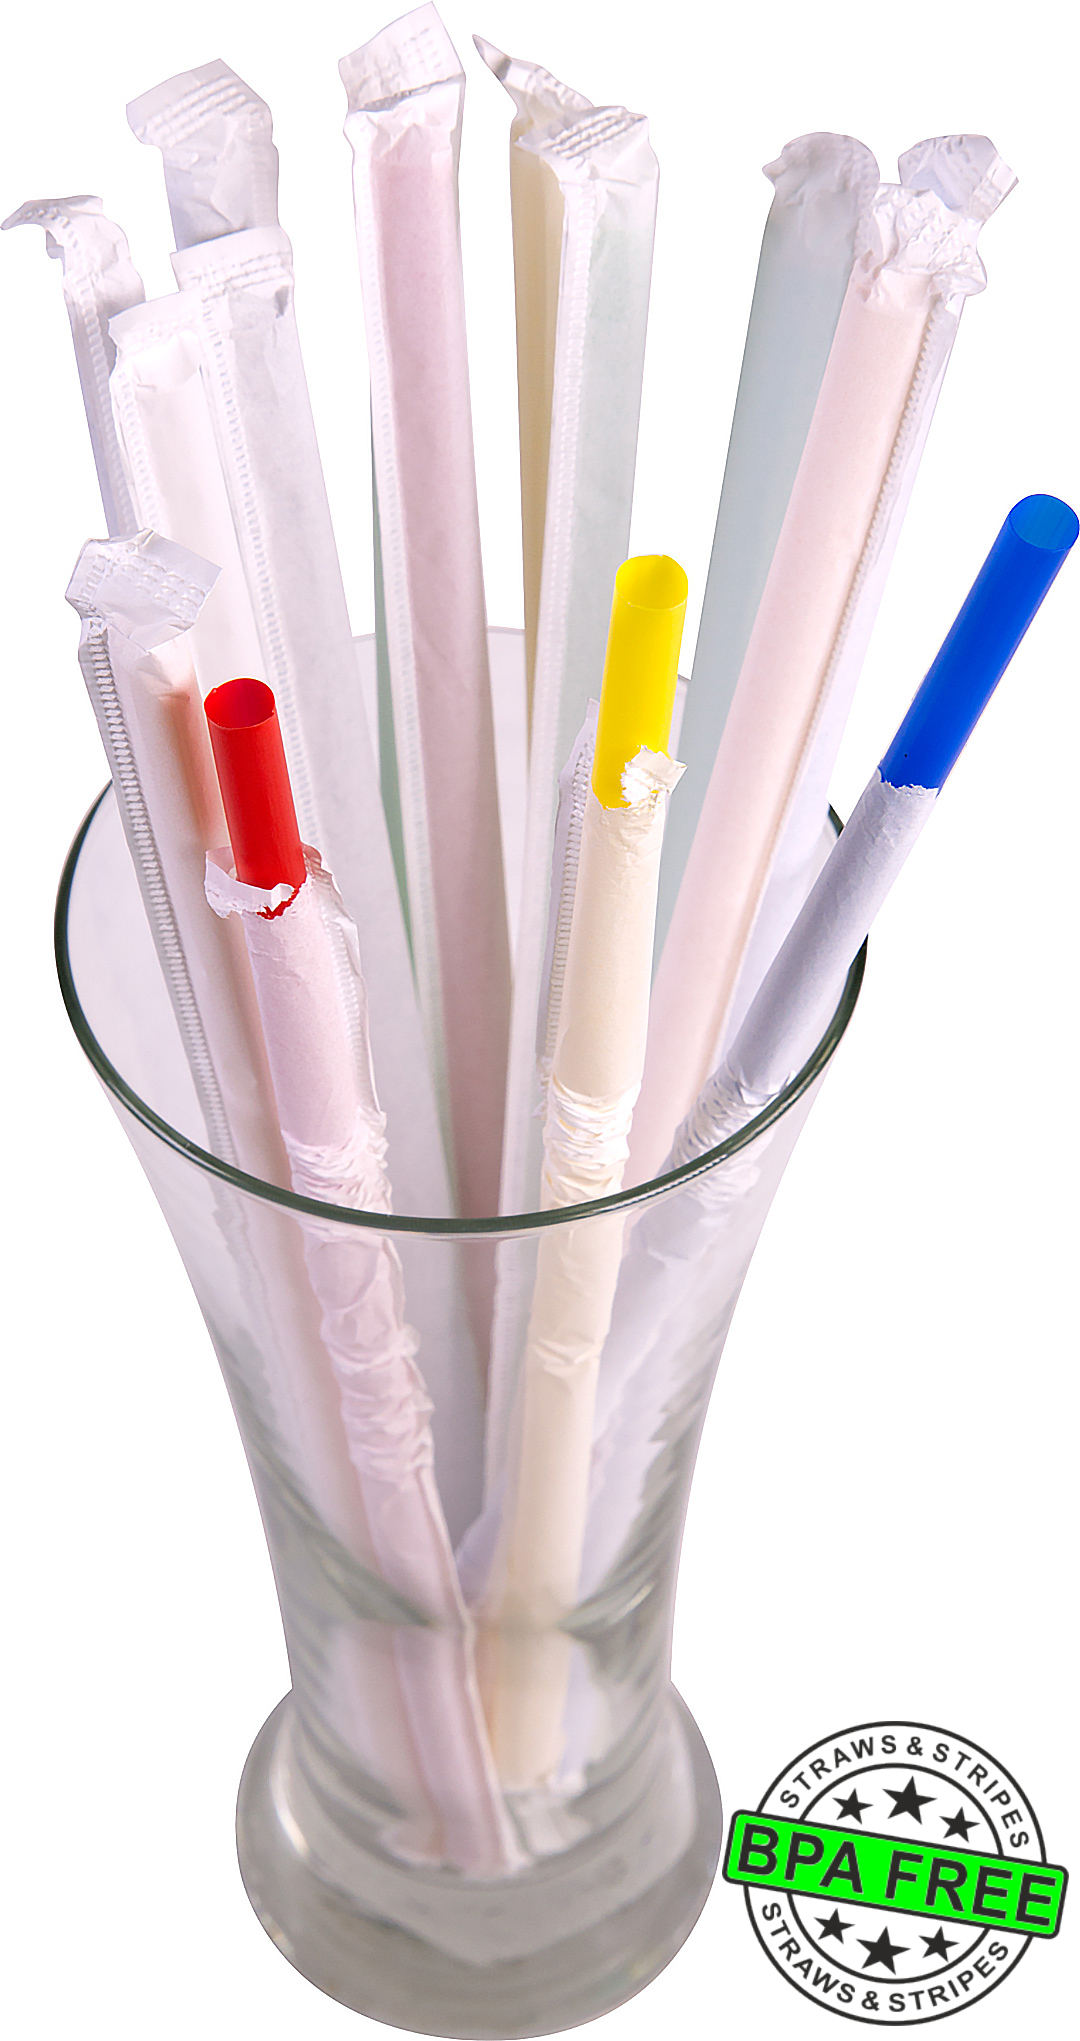 1 CASE - 2,500 (10x250) PAPER WRAPPED SMOOTHIE drinking straws 10 x 0.28 inch - color: mixed color